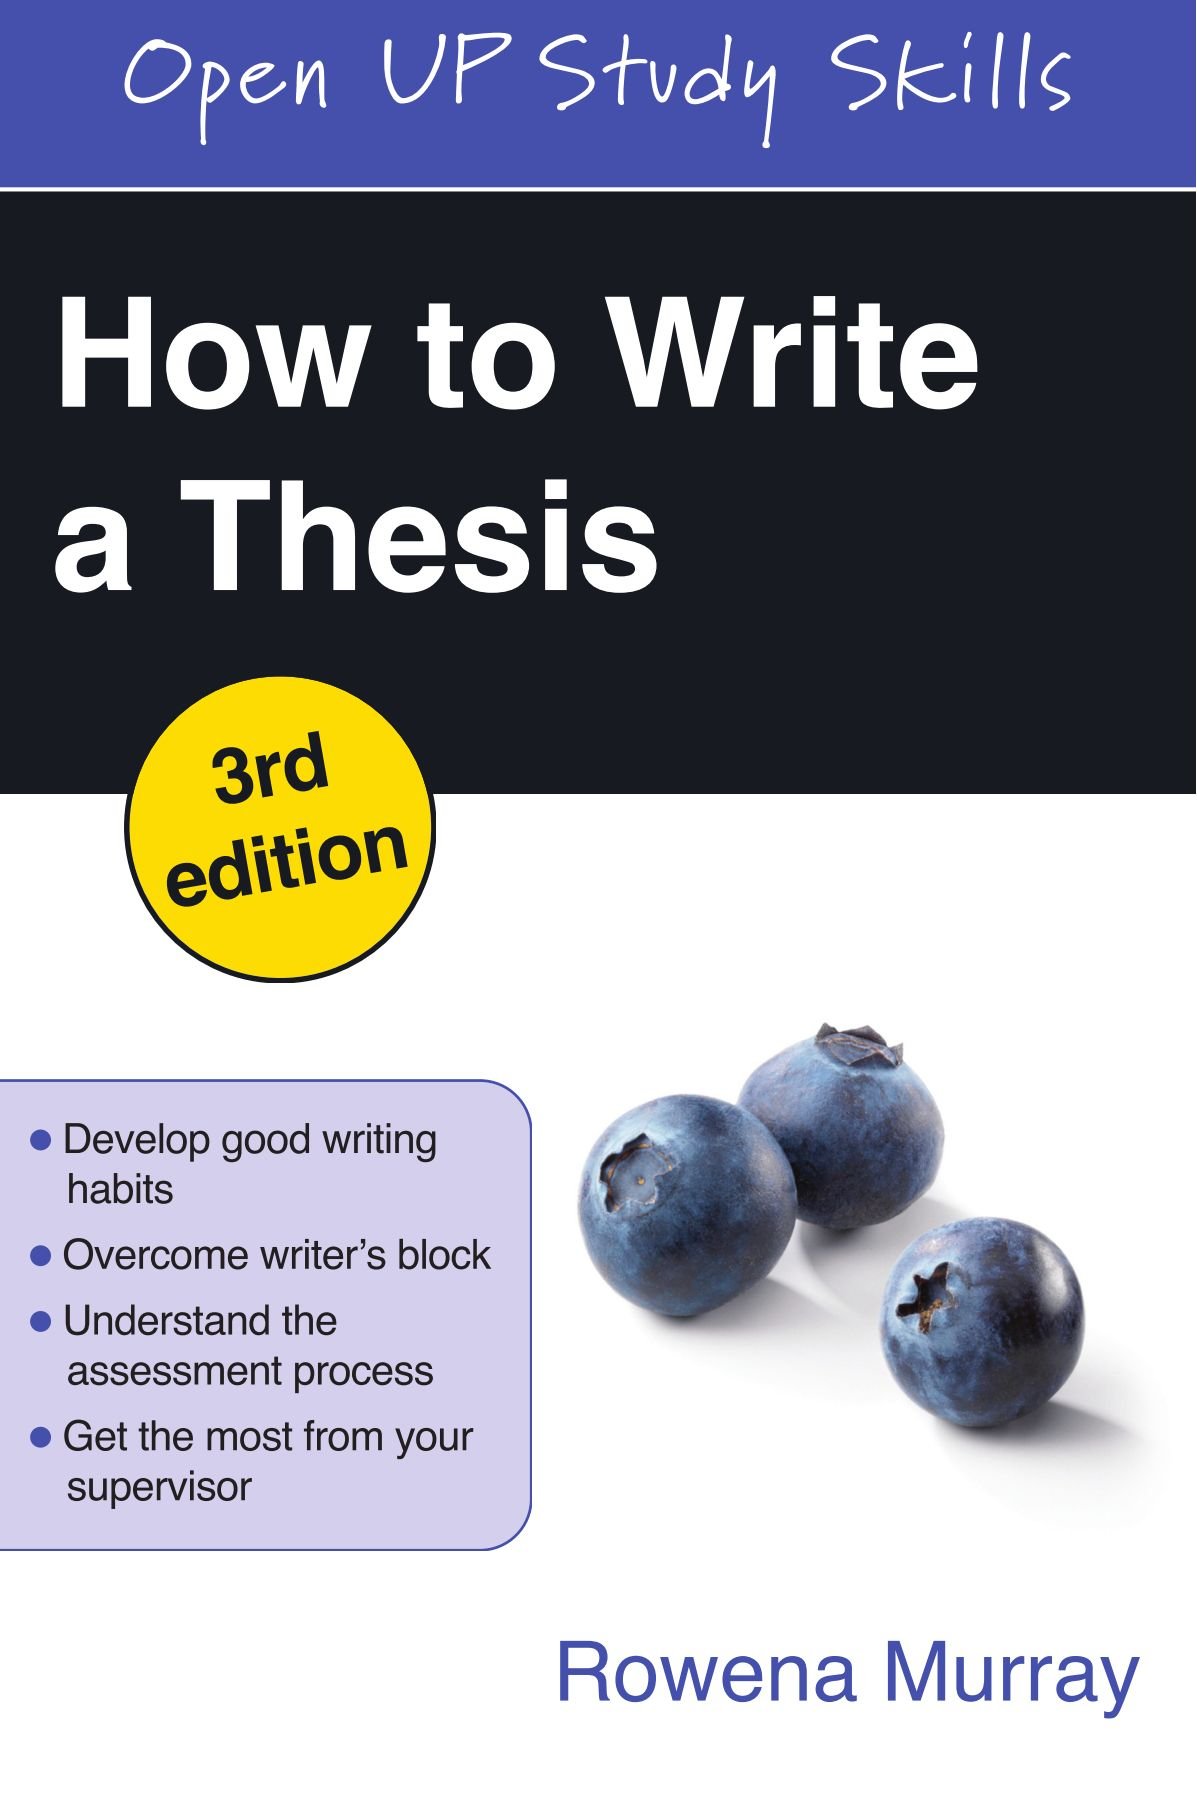 How to Write a Thesis on iDiscover